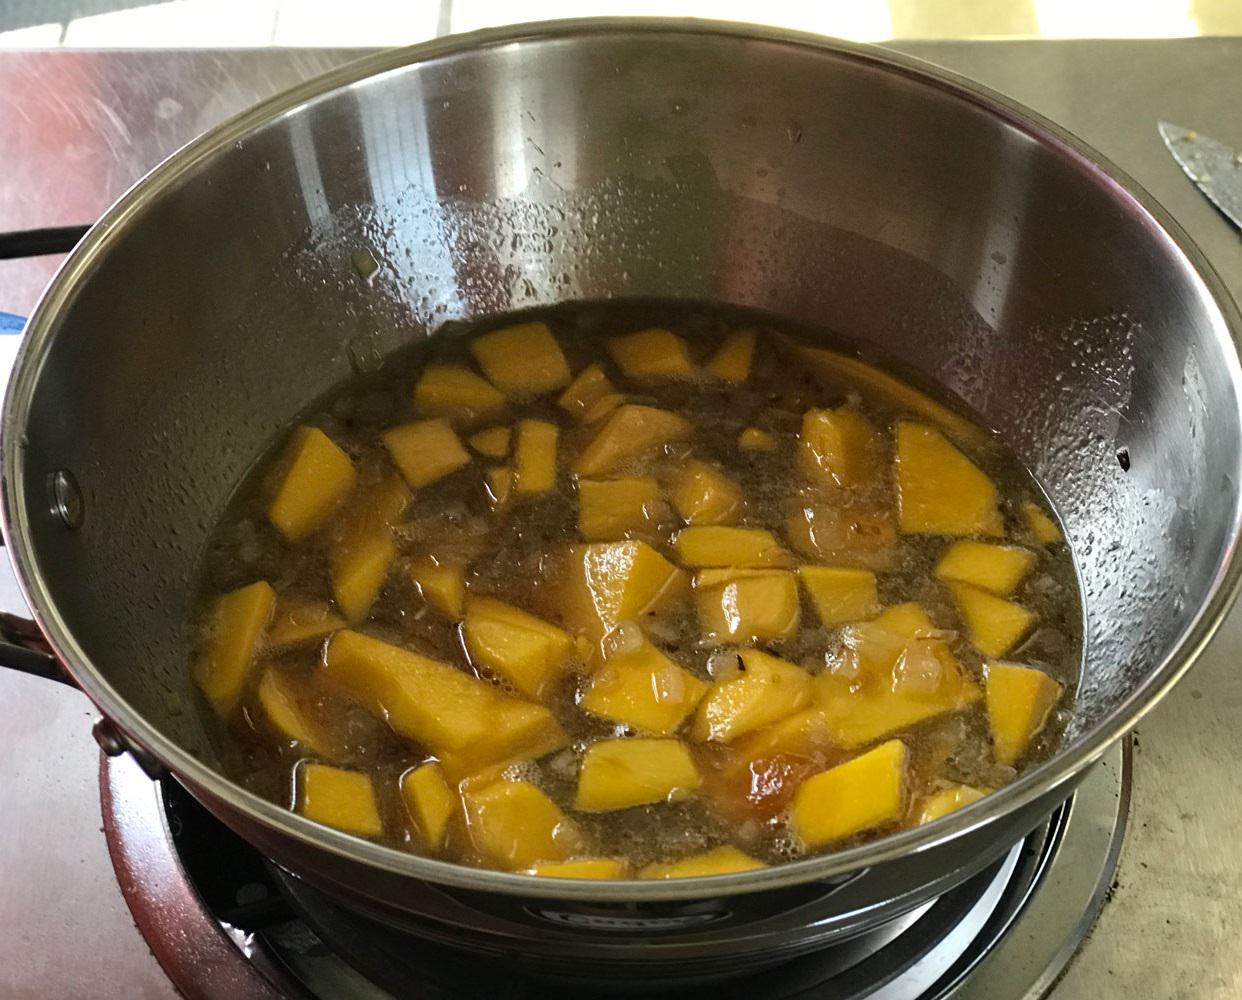 Cook over medium heat until simmering, then cook for a couple more minutes to thicken